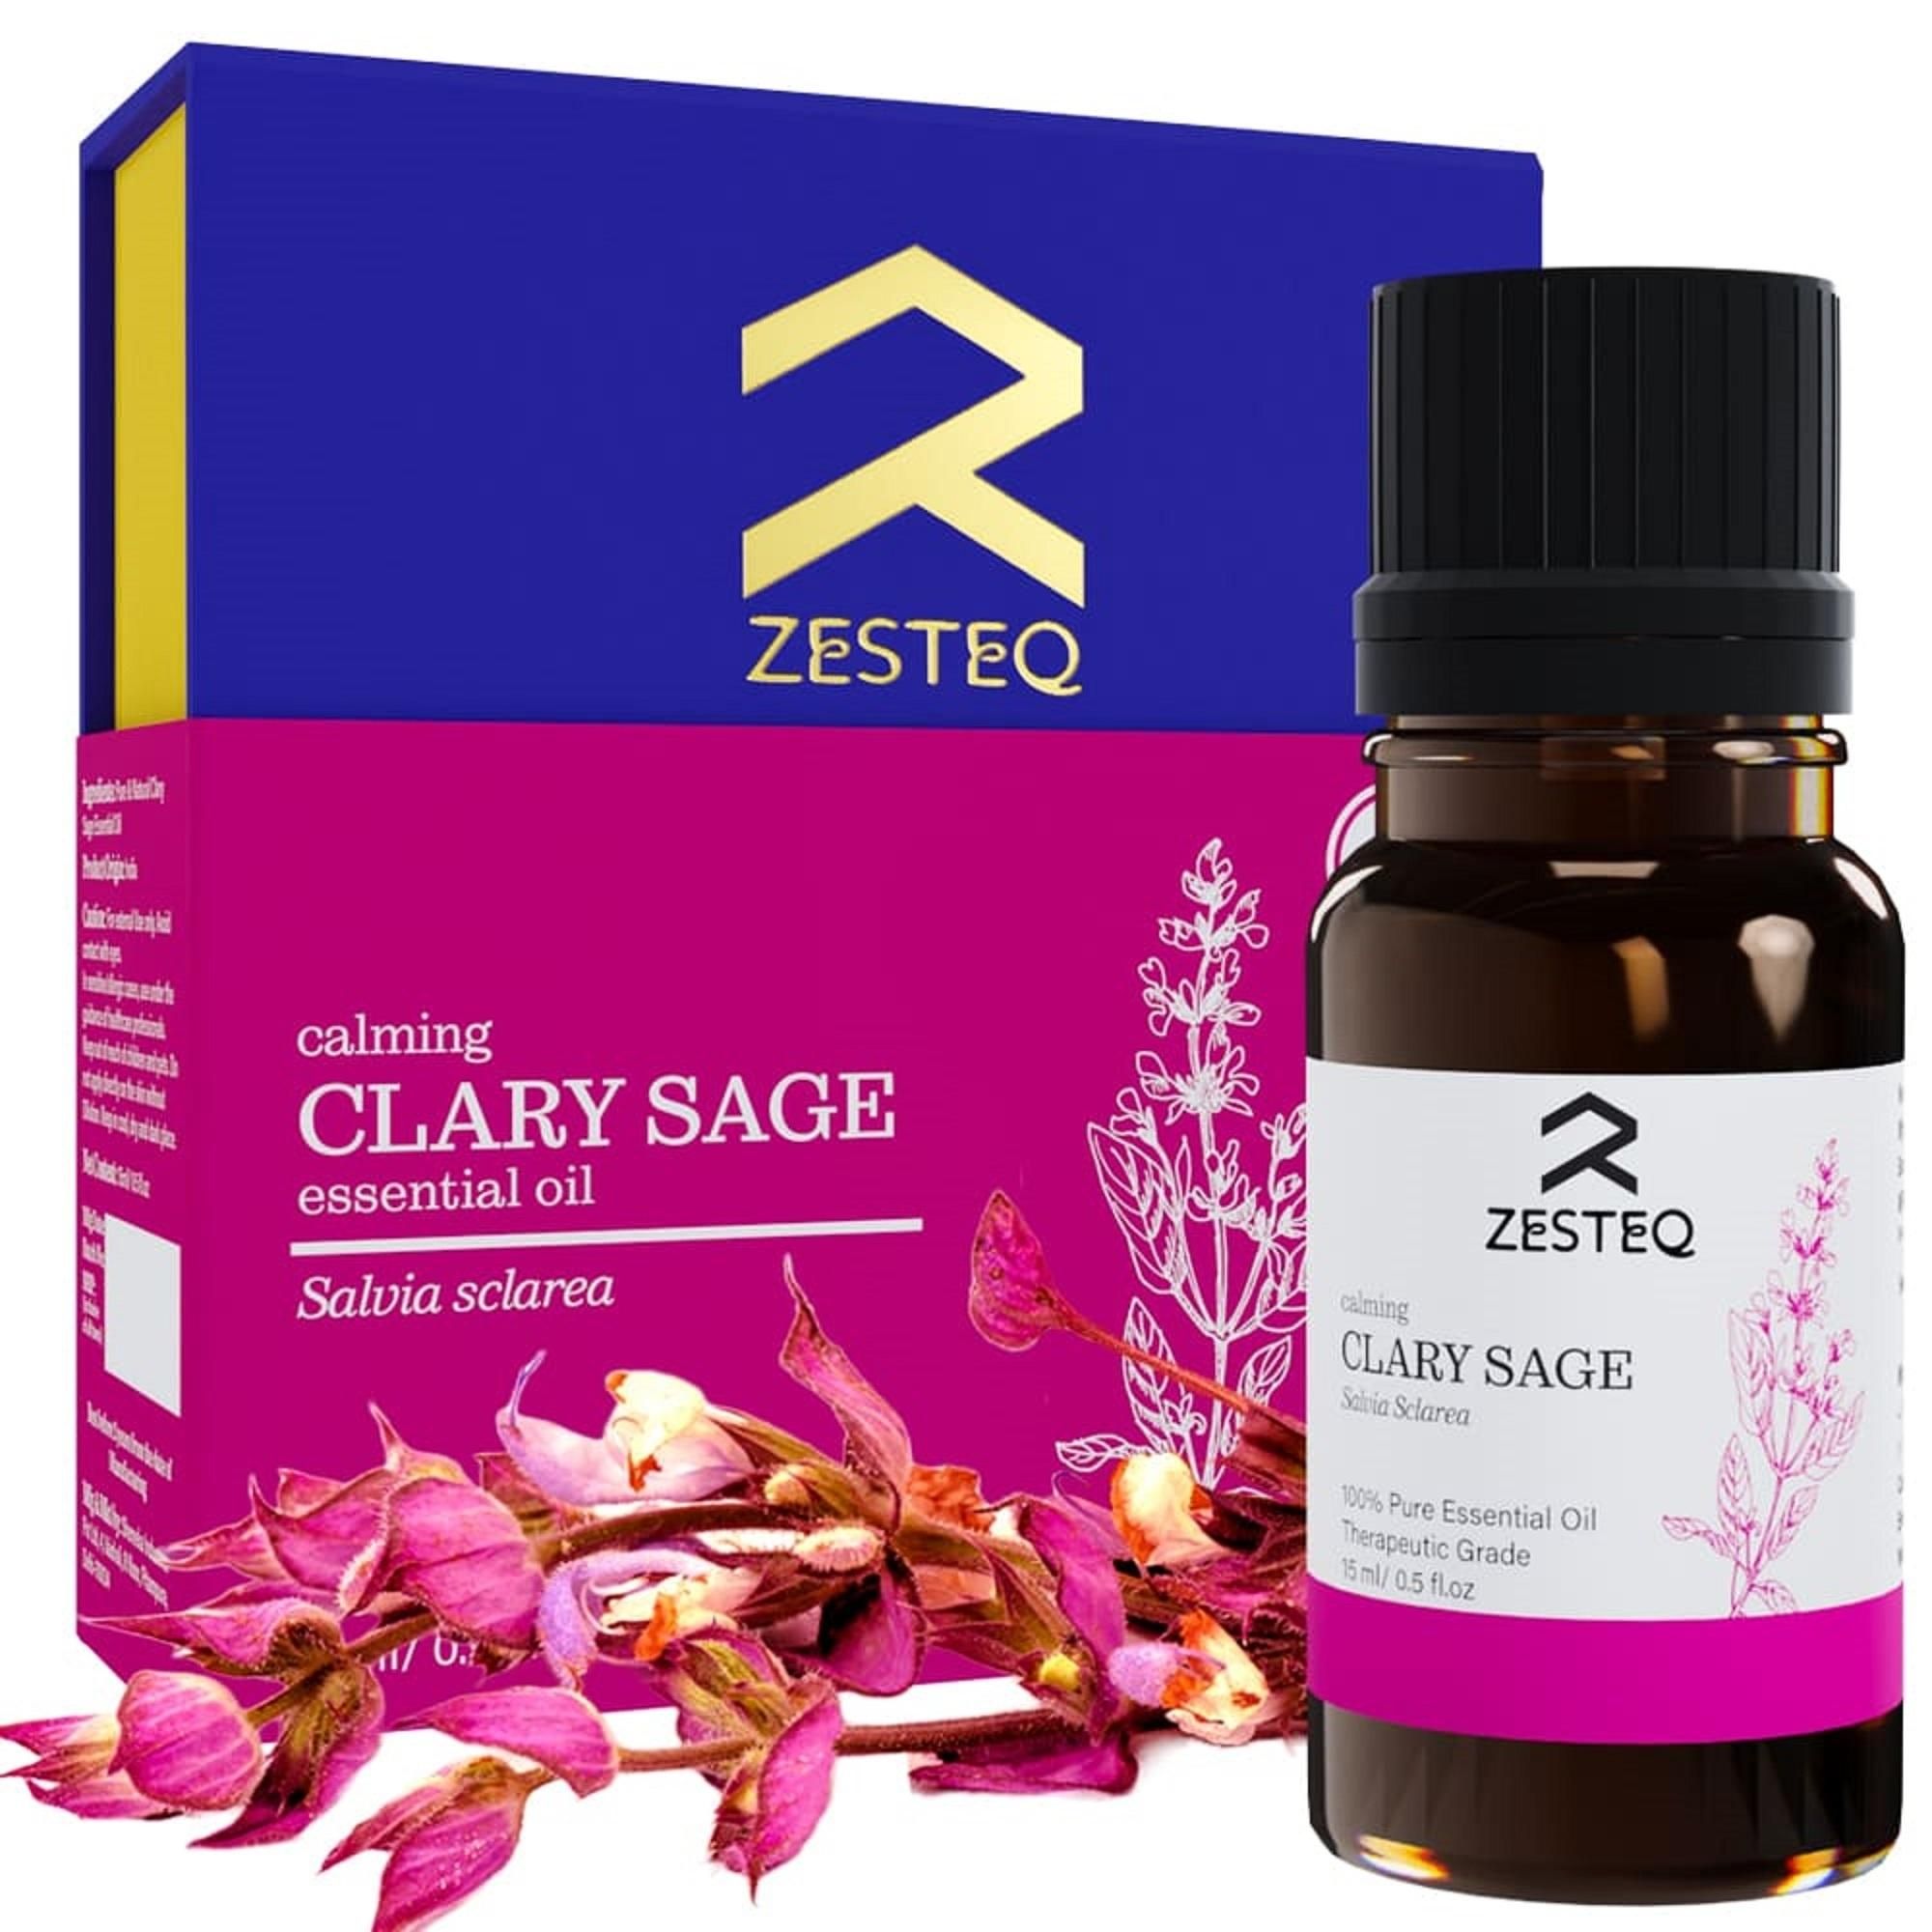 Zesteq Calming Clary Sage Essential Oil for Aromatherapy, Relieves Menstrual Cramps (15 ml)